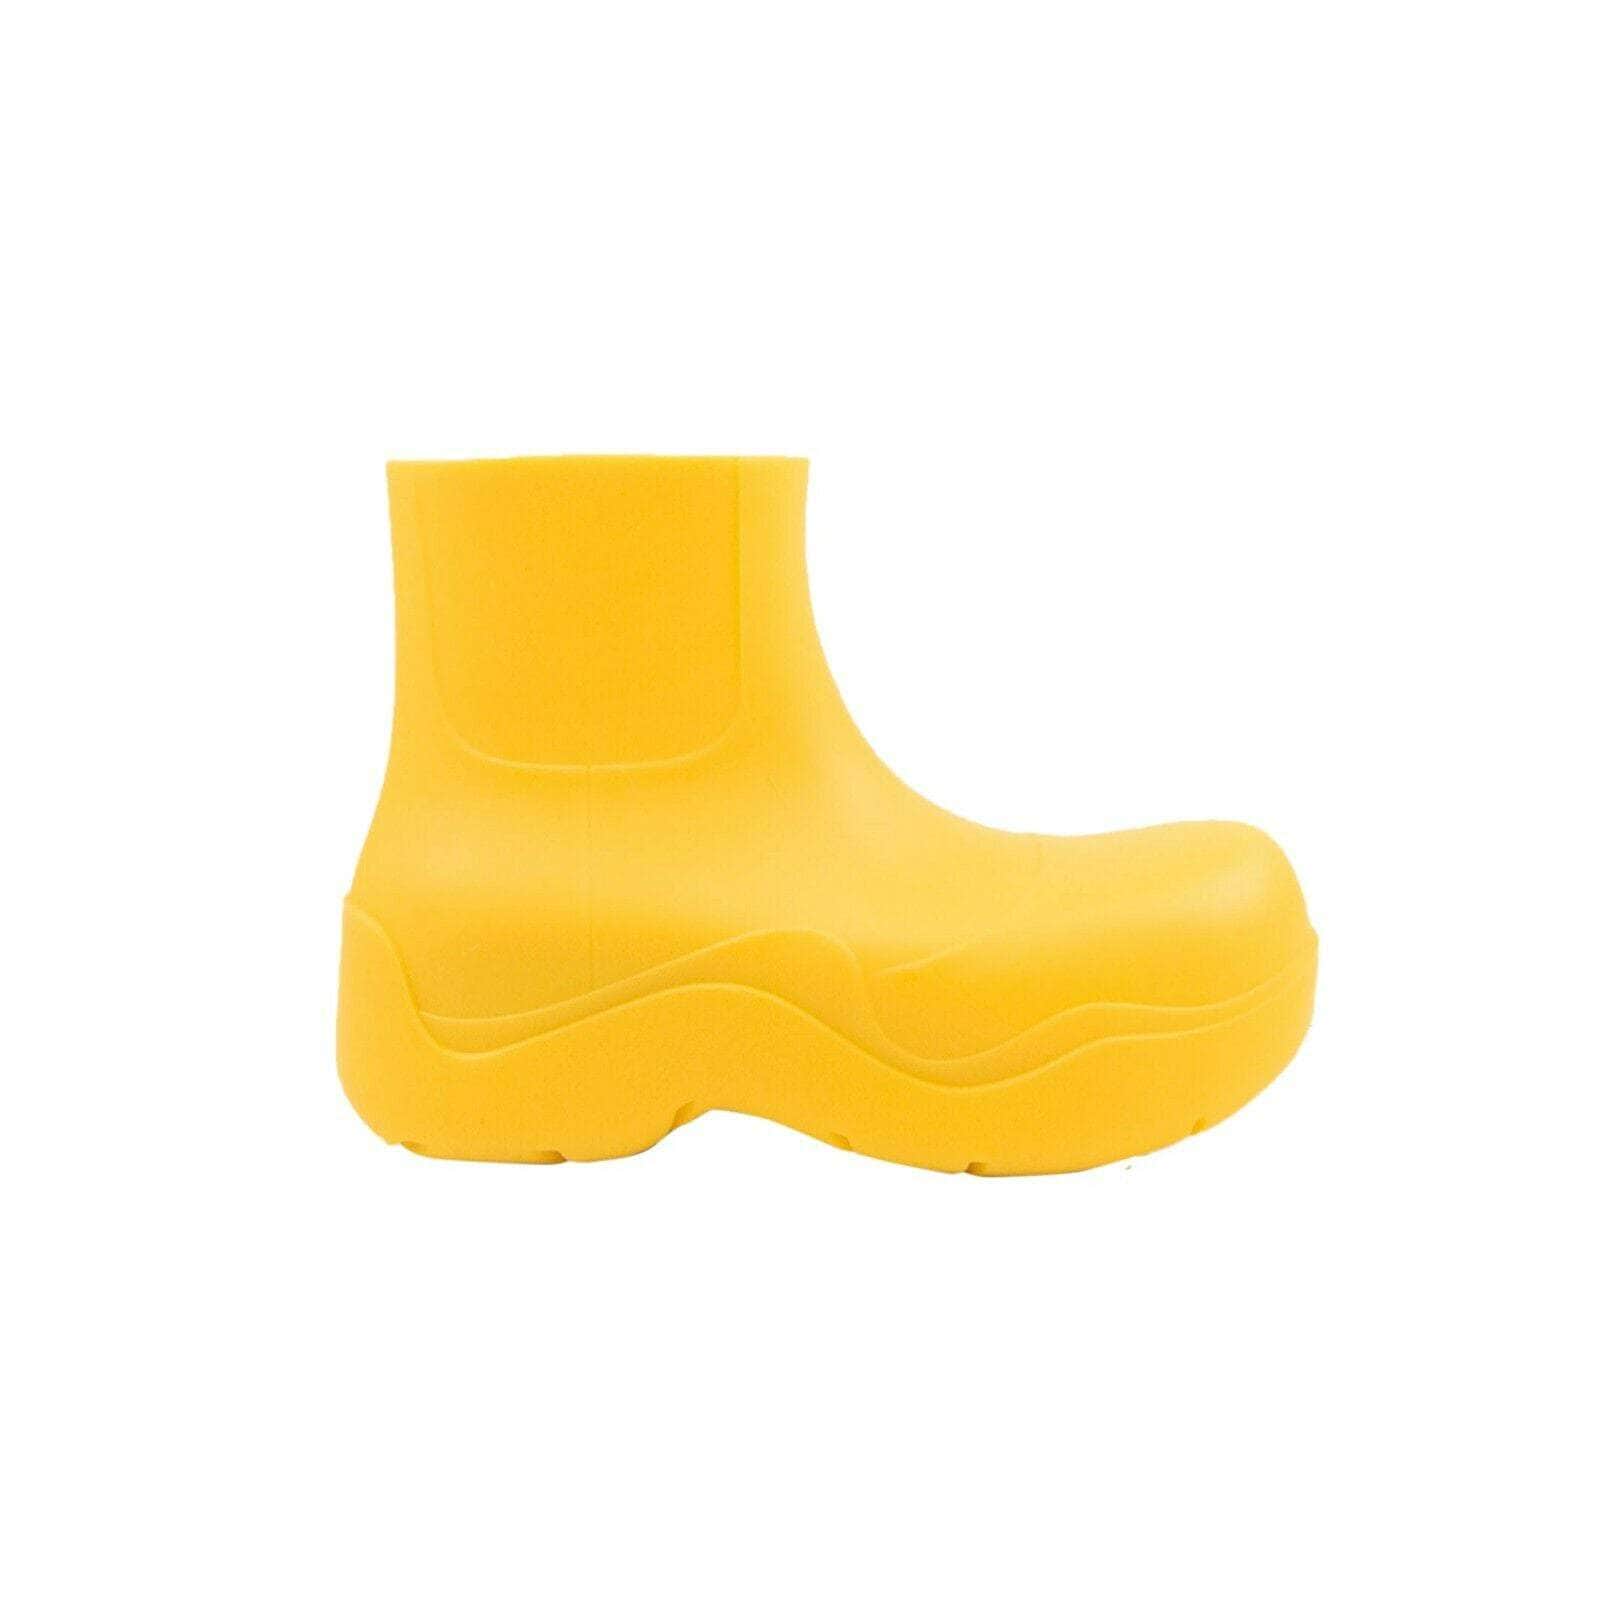 Bottega Veneta 500-750, channelenable-all, chicmi, couponcollection, gender-womens, main-shoes, shop375, Stadium Goods 34 Yellow Rubber Puddle Ankle Rain Boots 95-BTV-2014/34 95-BTV-2014/34